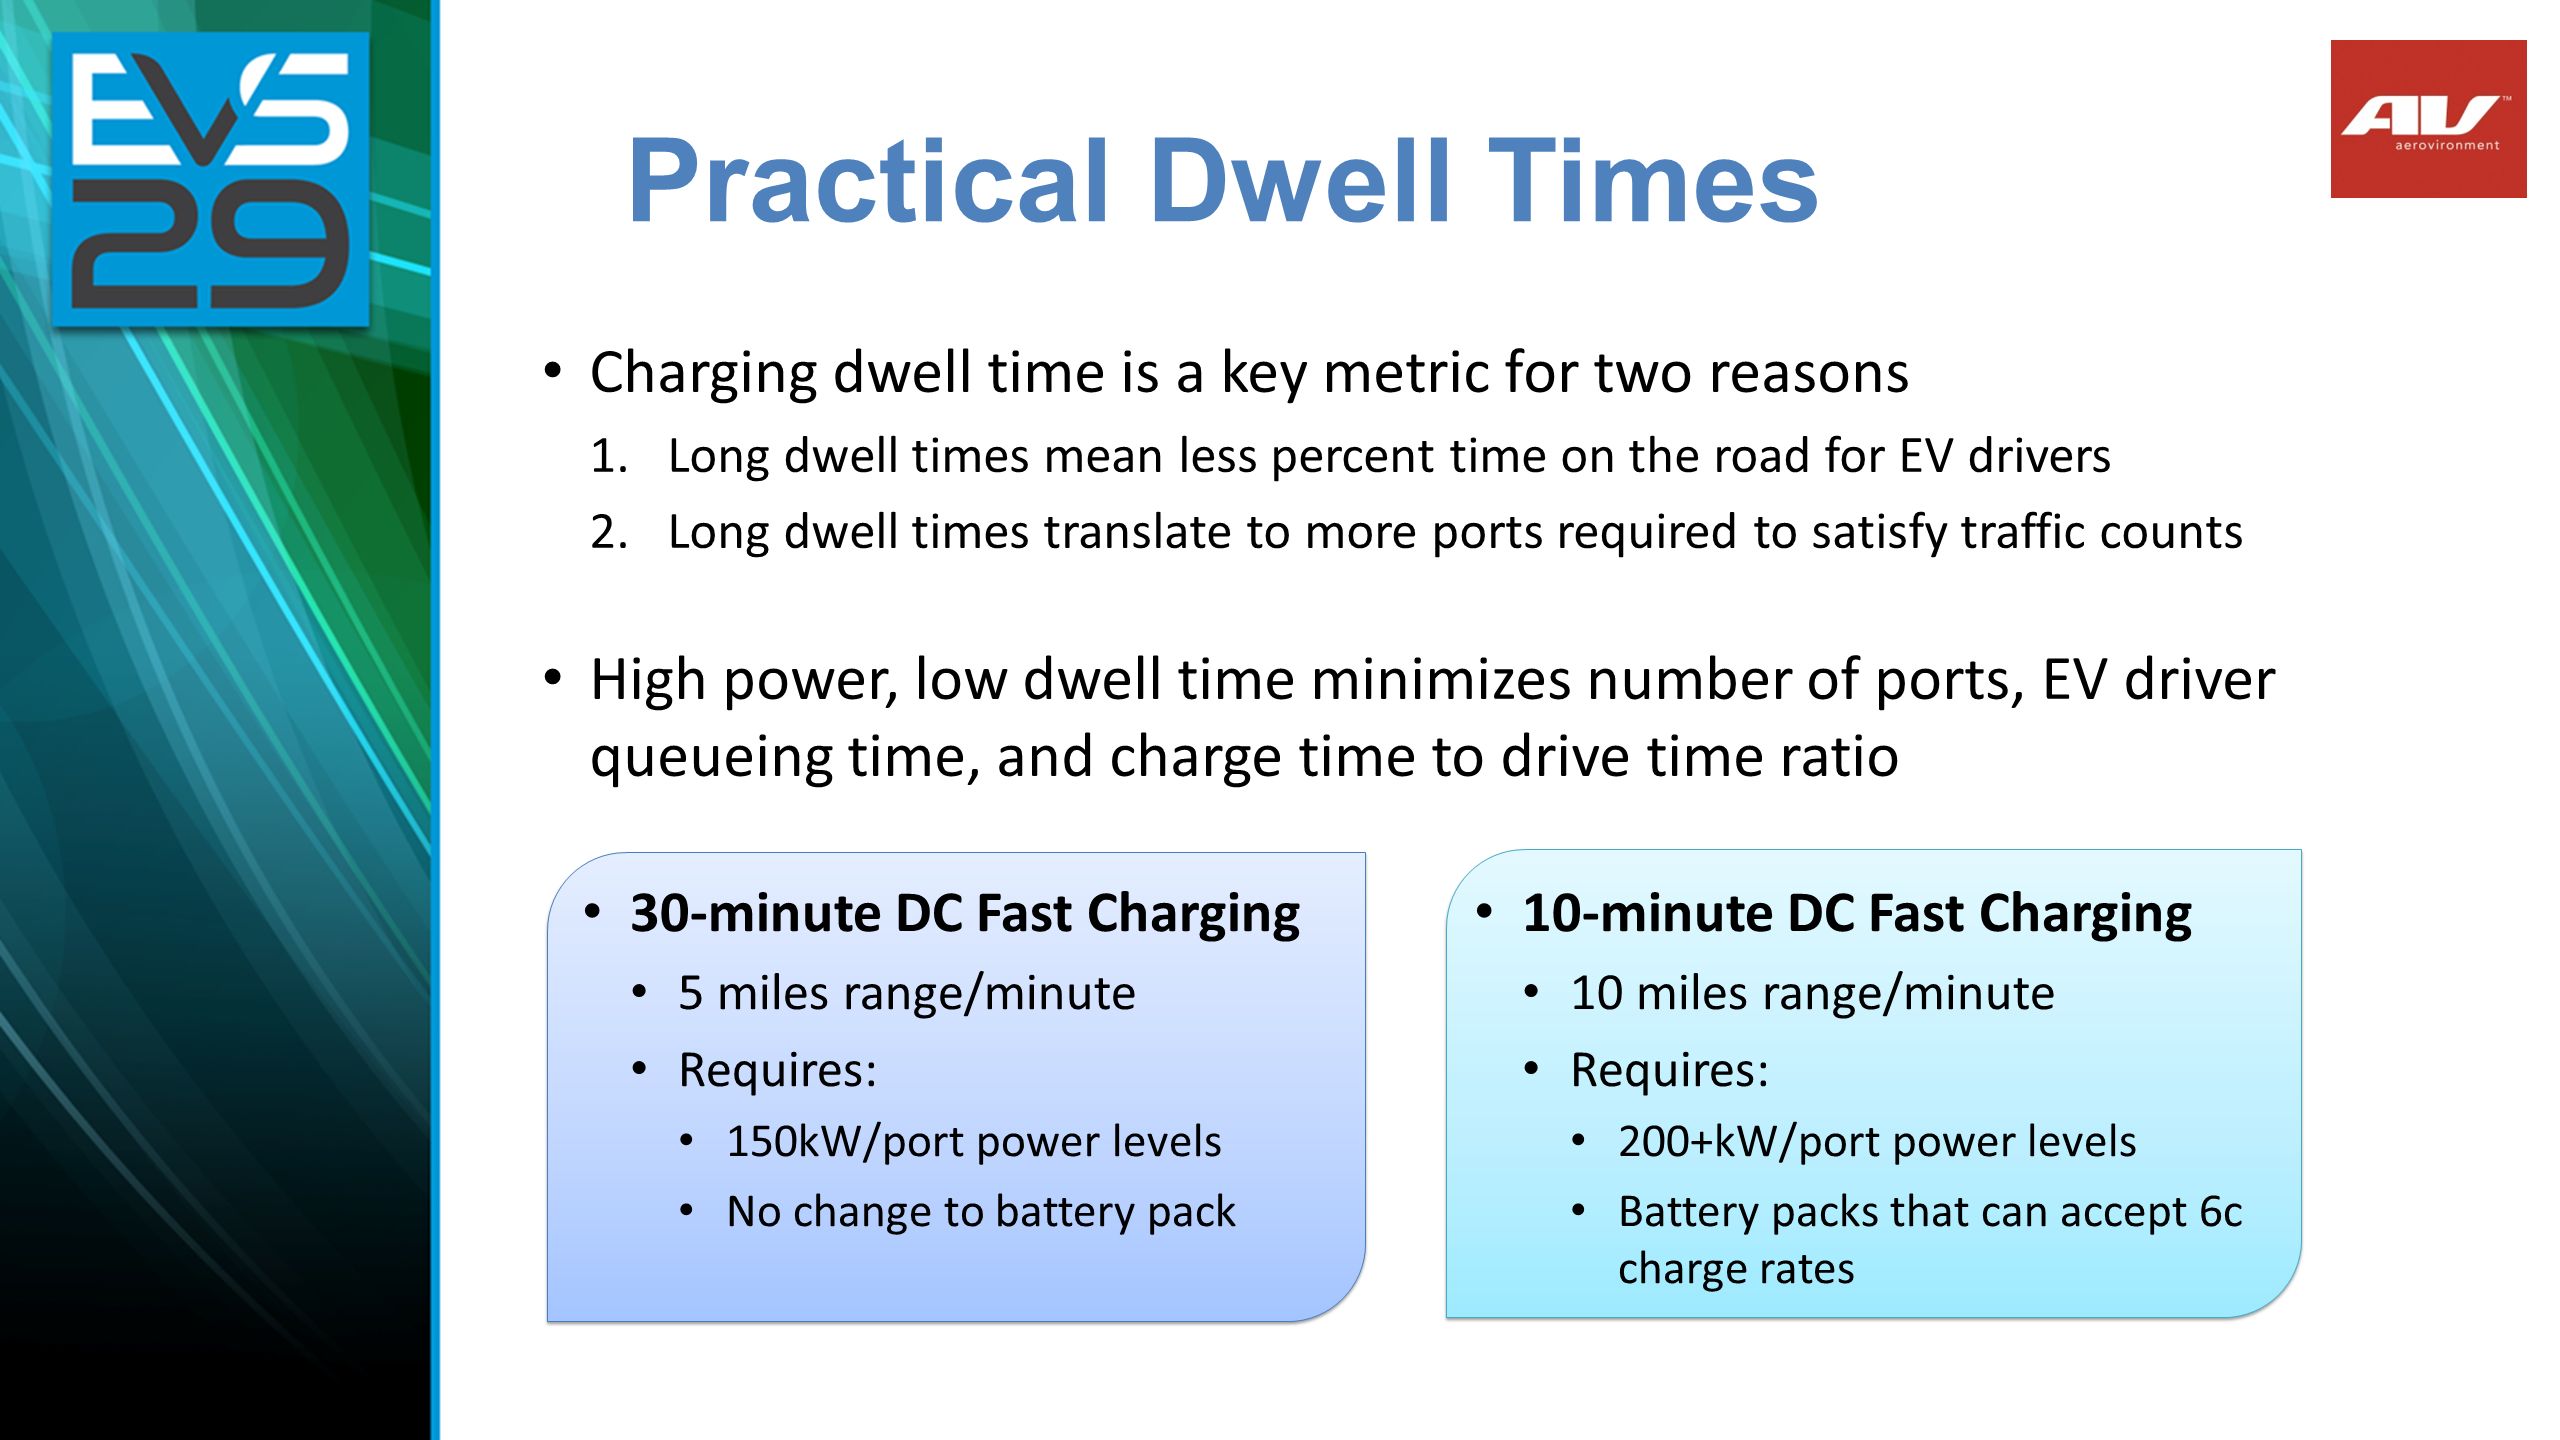 Practical Dwell Times Charging dwell time is a key metric for two reasons 1.Long dwell times mean less percent time on the road for EV drivers 2.Long dwell times translate to more ports required to satisfy traffic counts High power, low dwell time minimizes number of ports, EV driver queueing time, and charge time to drive time ratio 30-minute DC Fast Charging 5 miles range/minute Requires: 150kW/port power levels No change to battery pack 10-minute DC Fast Charging 10 miles range/minute Requires: 200+kW/port power levels Battery packs that can accept 6c charge rates